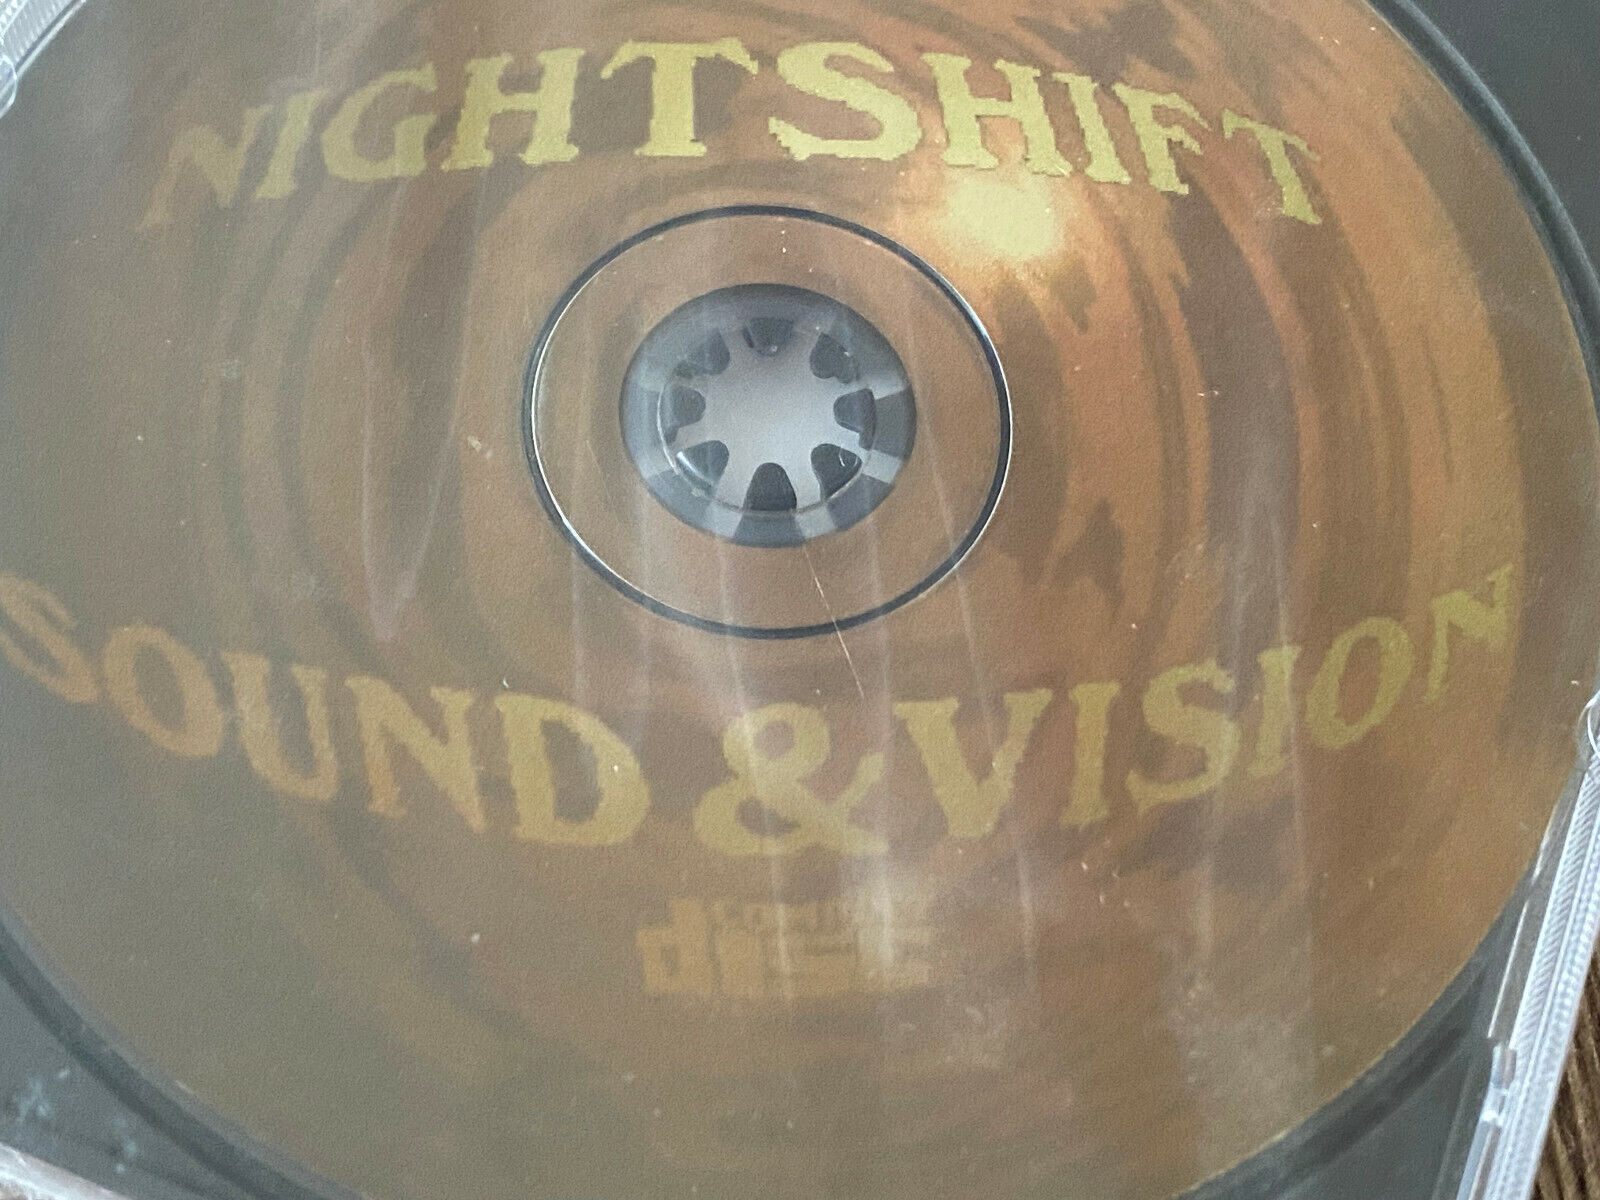 Sound & Vision From Nightshift CD - ROM - Amiga / Commodore / PC/Mac ROM, New